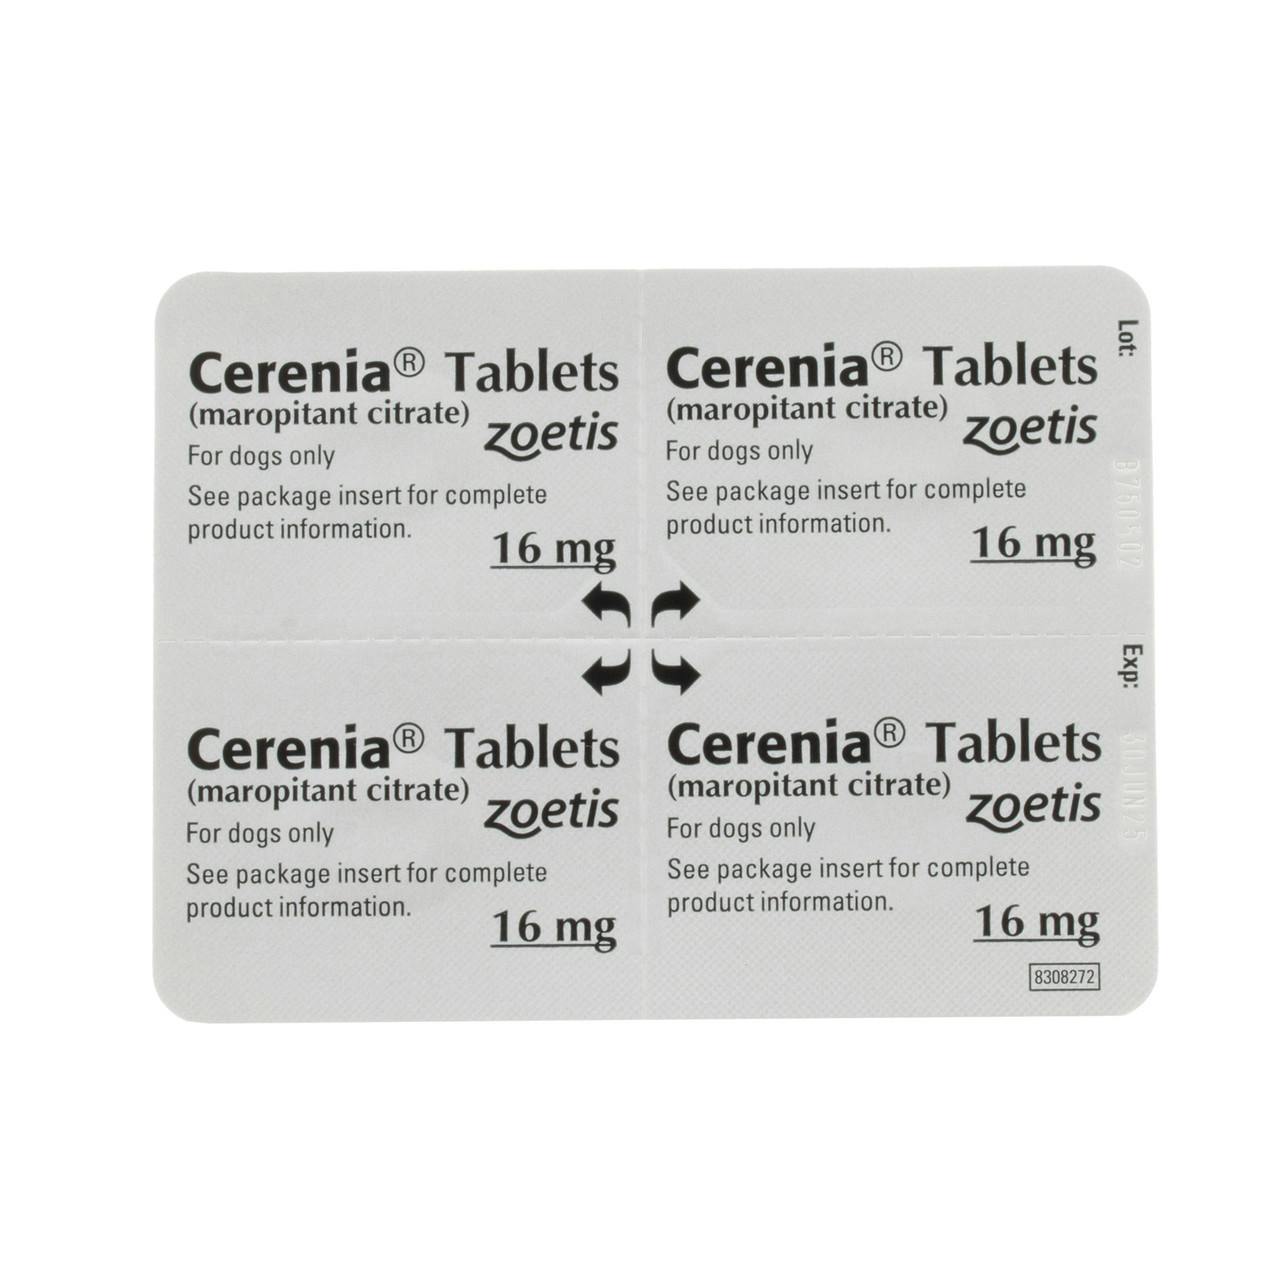 A square gray pack that contains 16mg Cerenia Tablets for dogs.